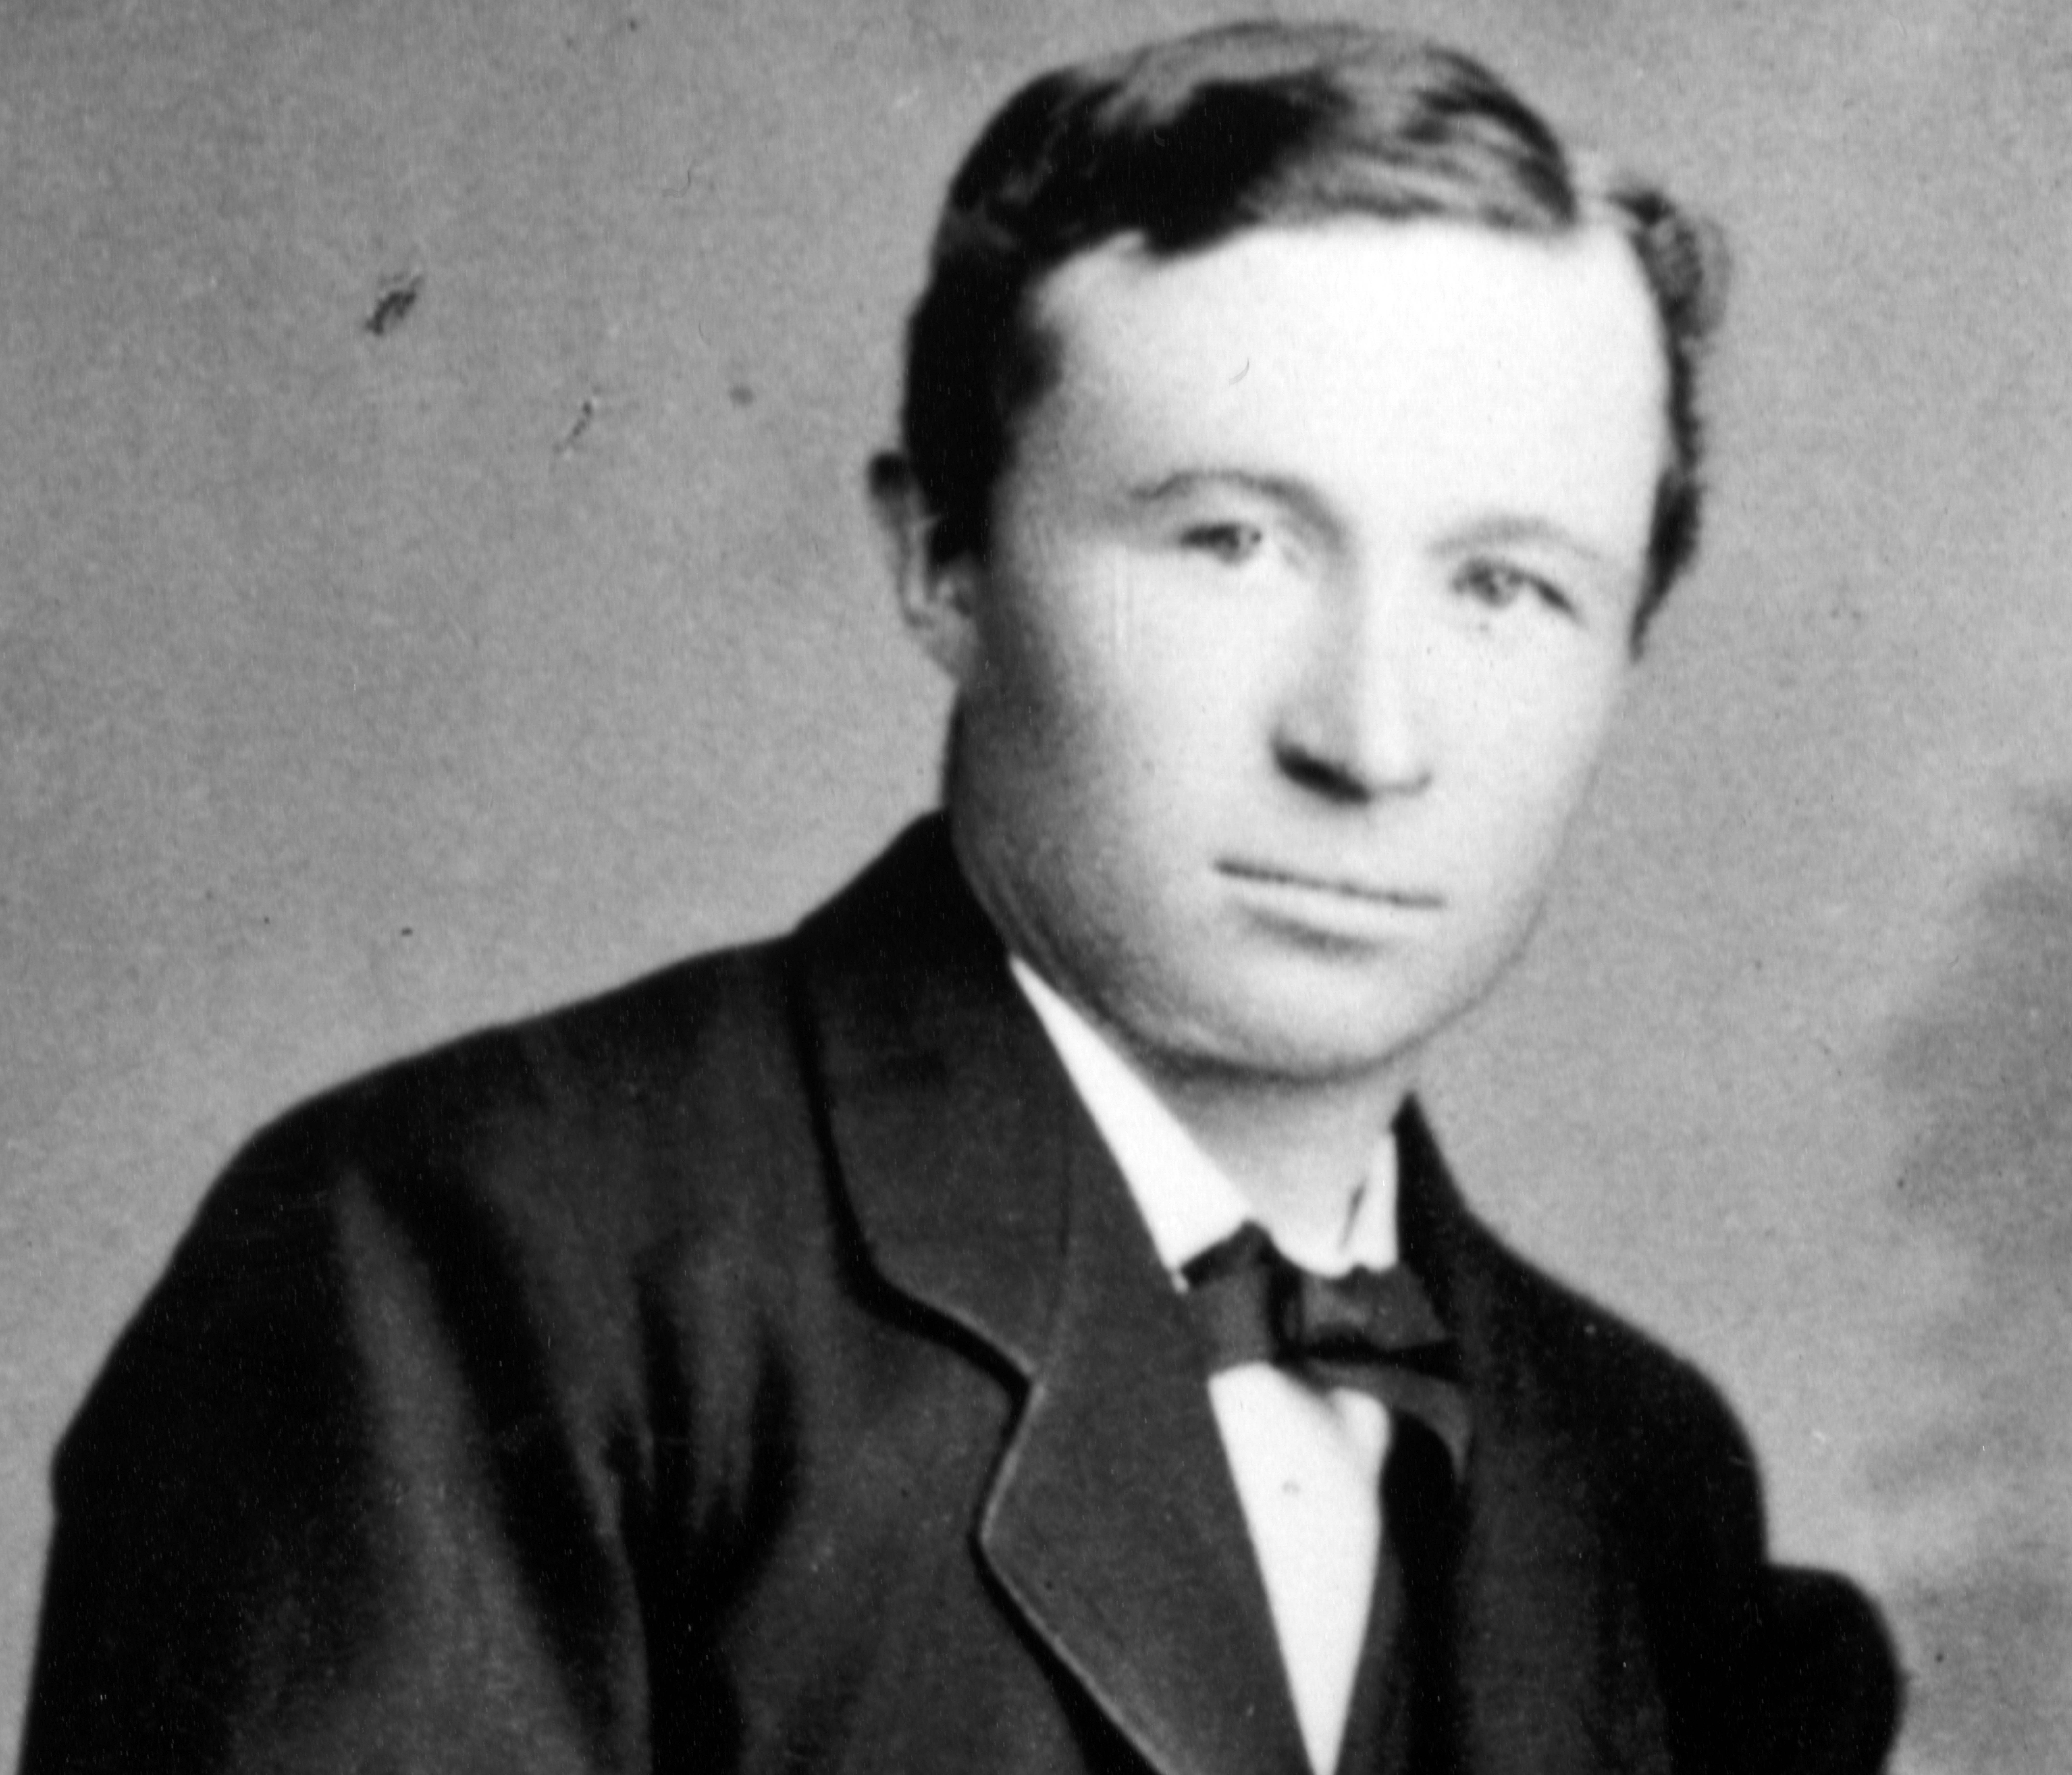 Young Adolph Coors